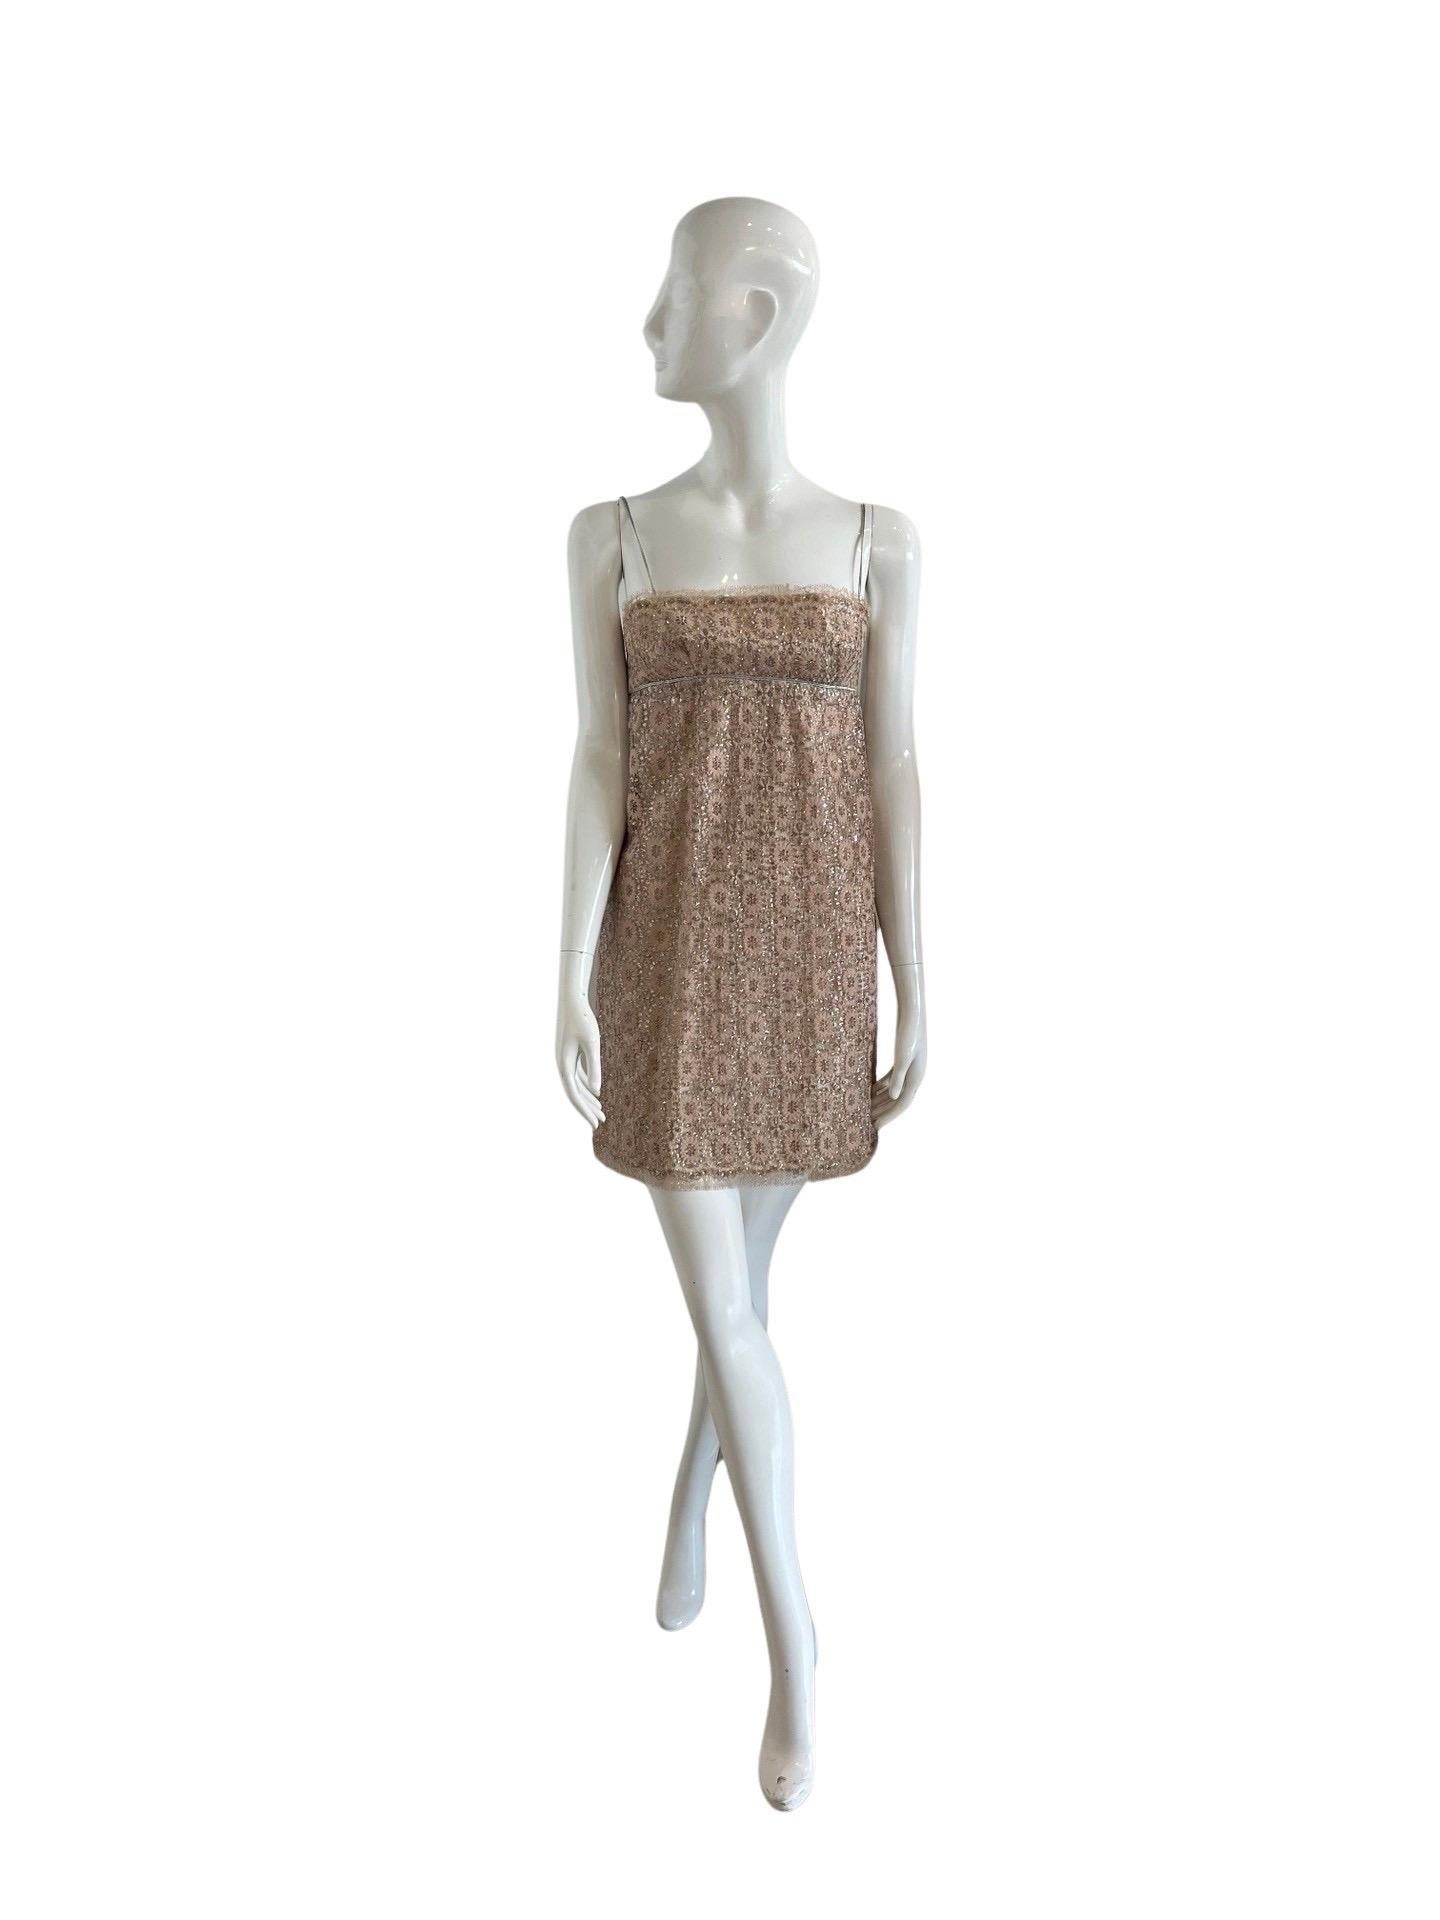 The most beautiful 60s vintage mini from the English label Jean Varon which was designed by John Bates in the 60s and 70s.  Bates was one of the pioneers of the miniskirt.  This babydoll style mini dress is done in pink and silver lace with silver